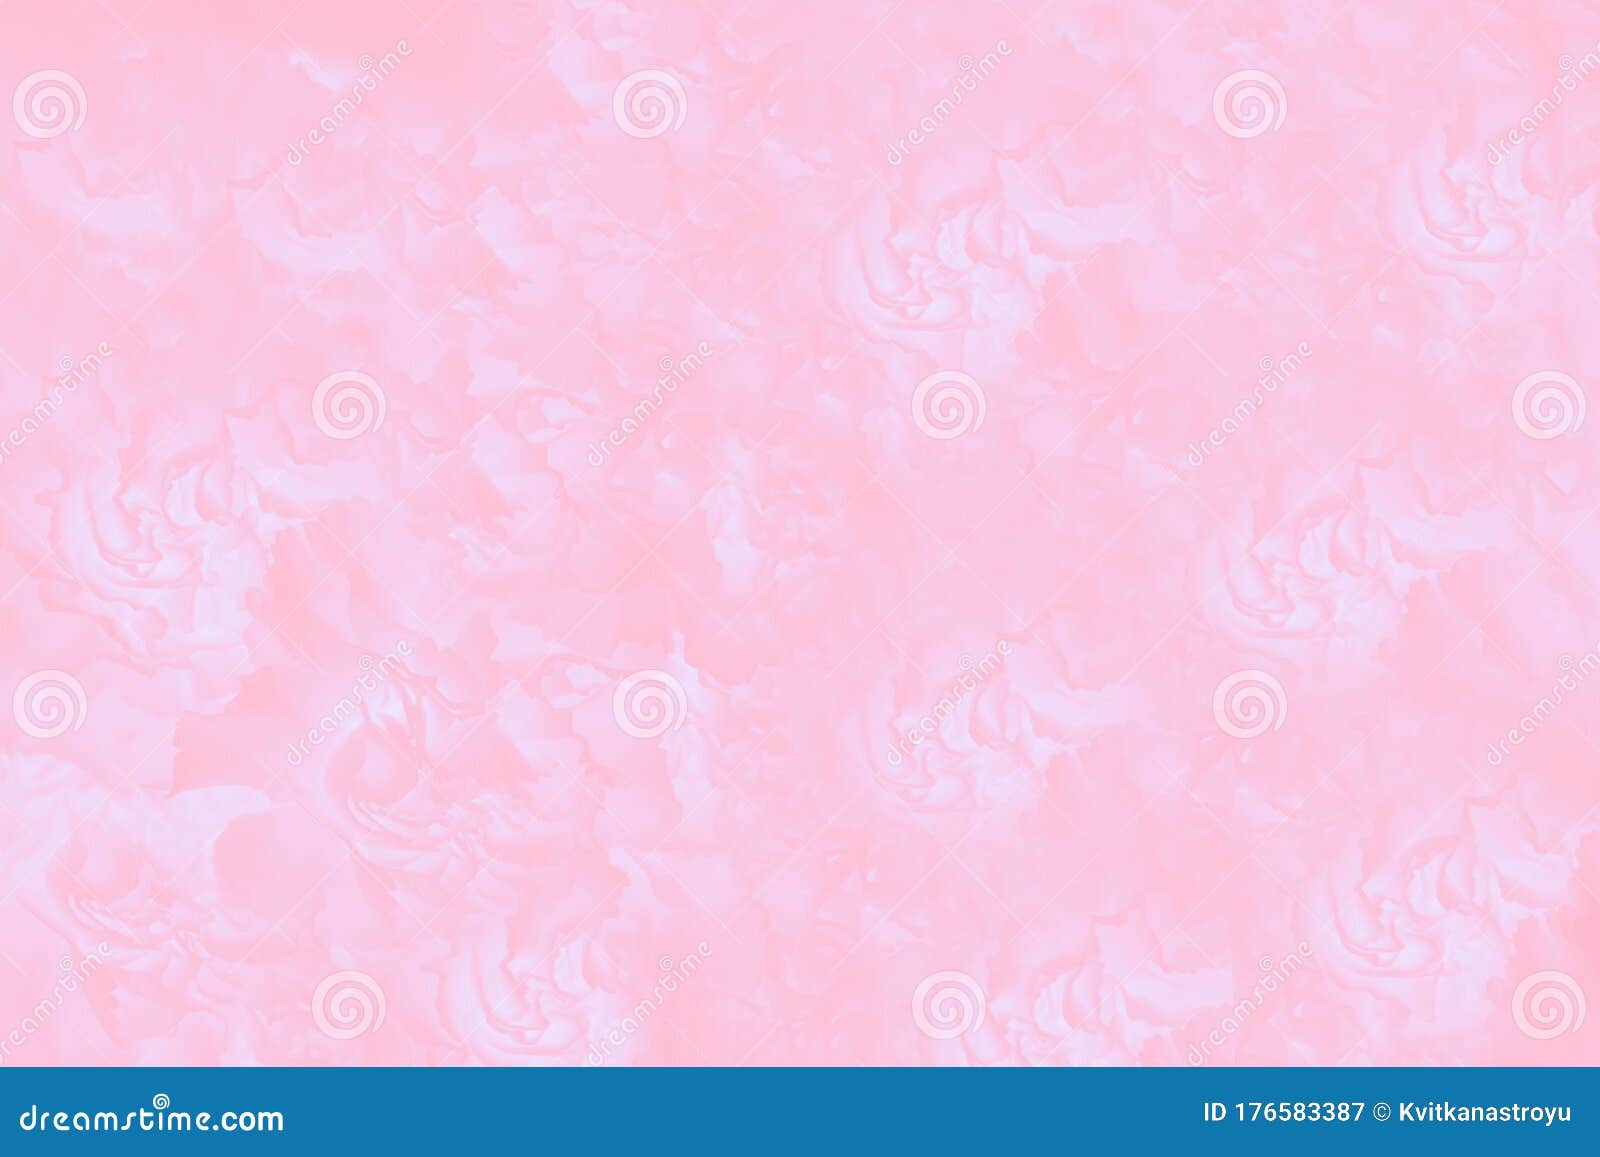 Pale Pink Abstract Background. Floral Gradient Background, Delicate ...